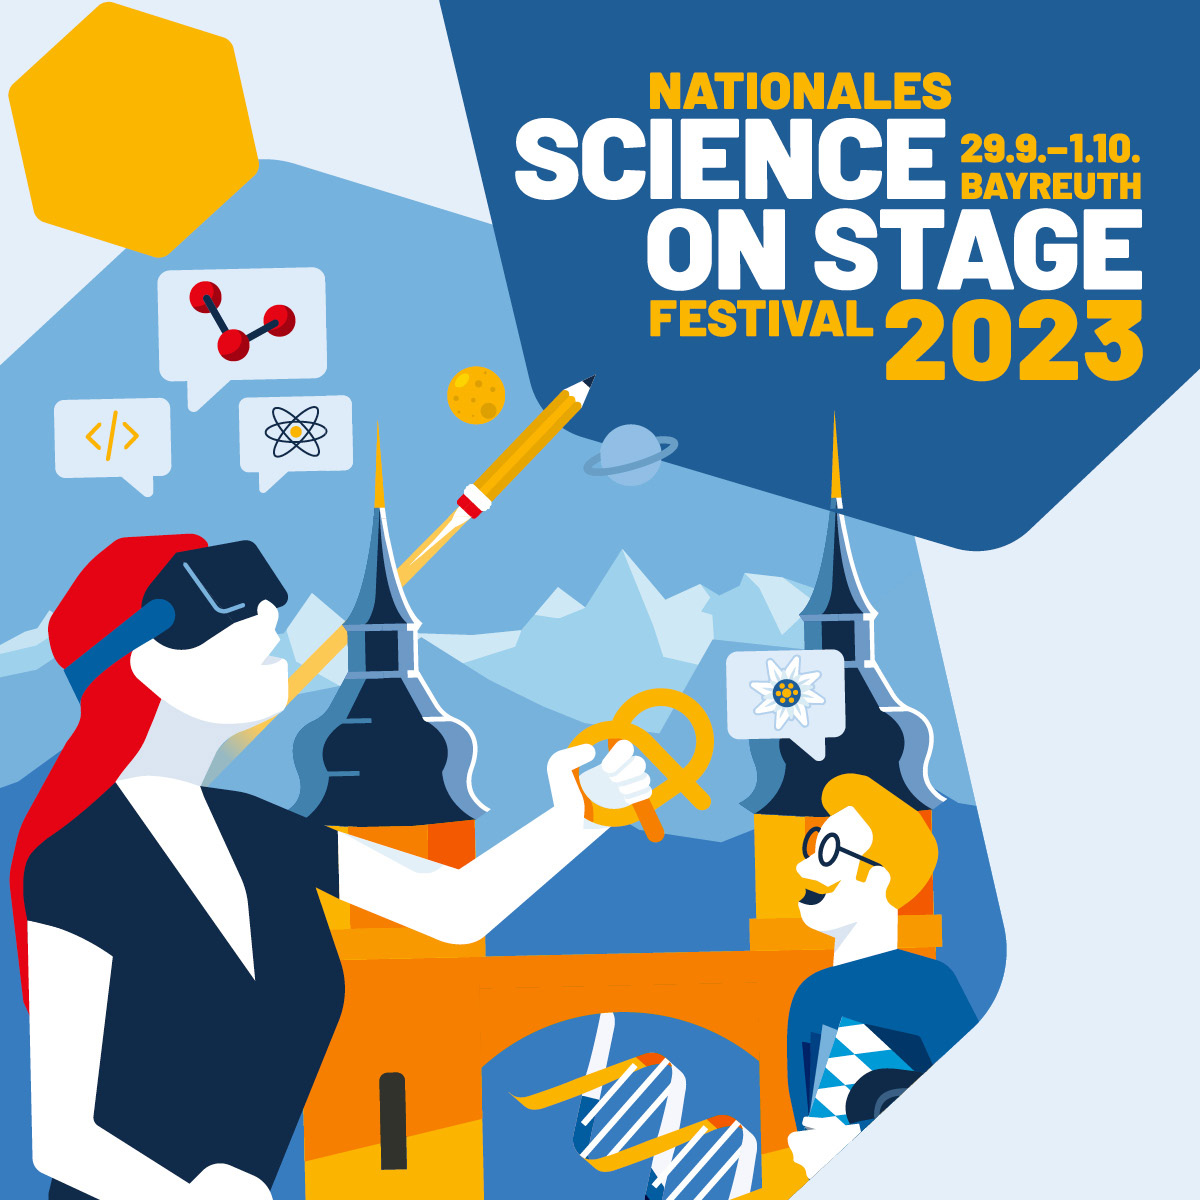 Nationales Science on Stage Festival Bayreuth